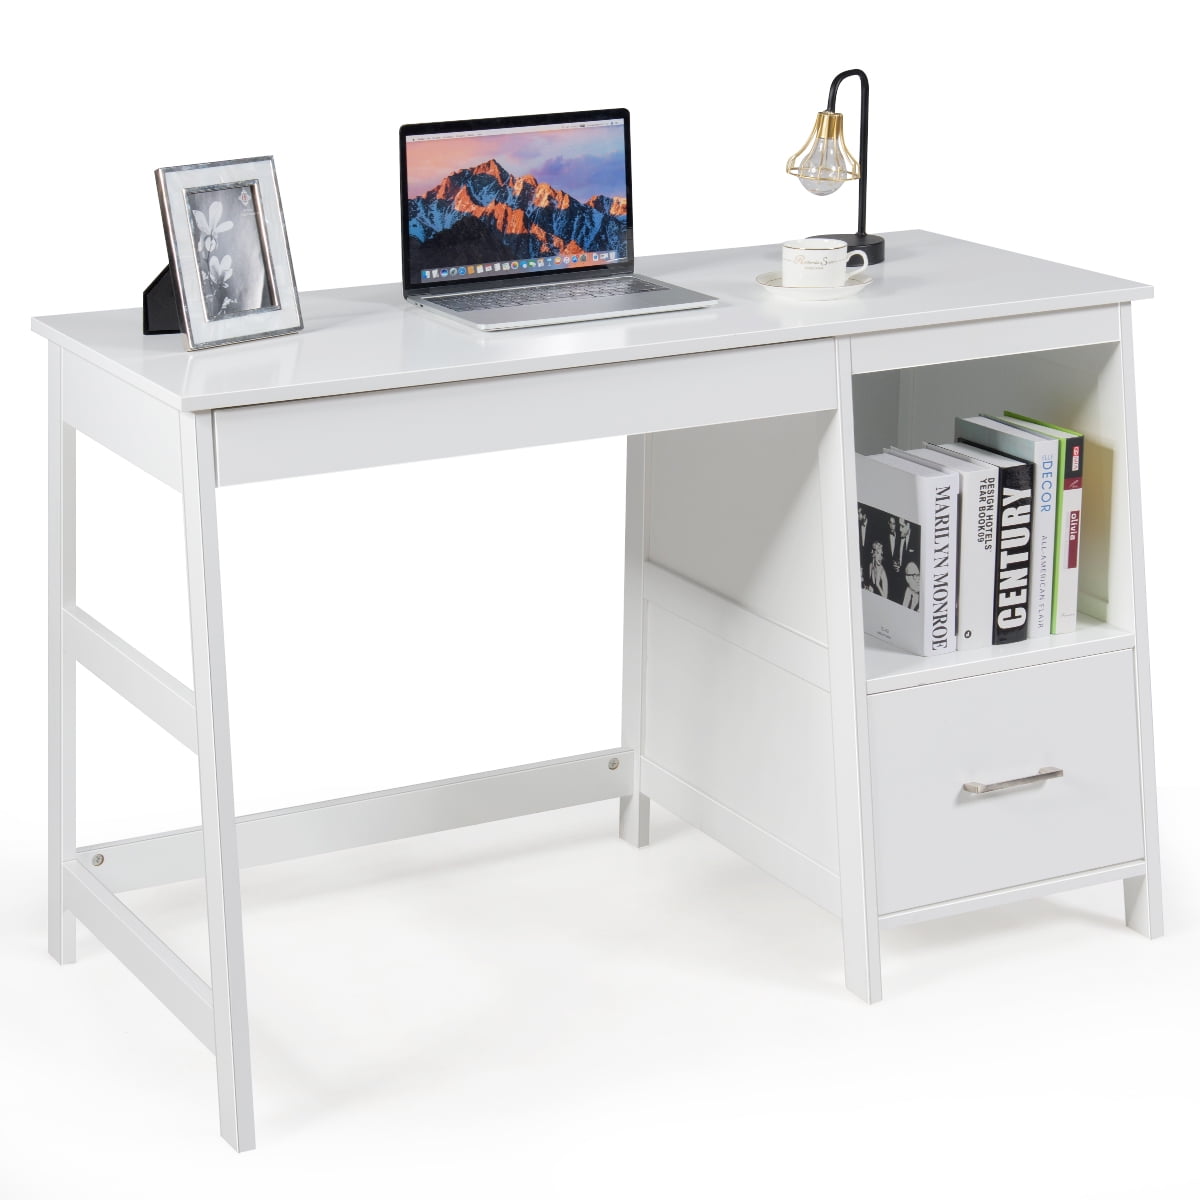 Madrid White Gloss Office Desk Computer Study table Workstation with Drawers 